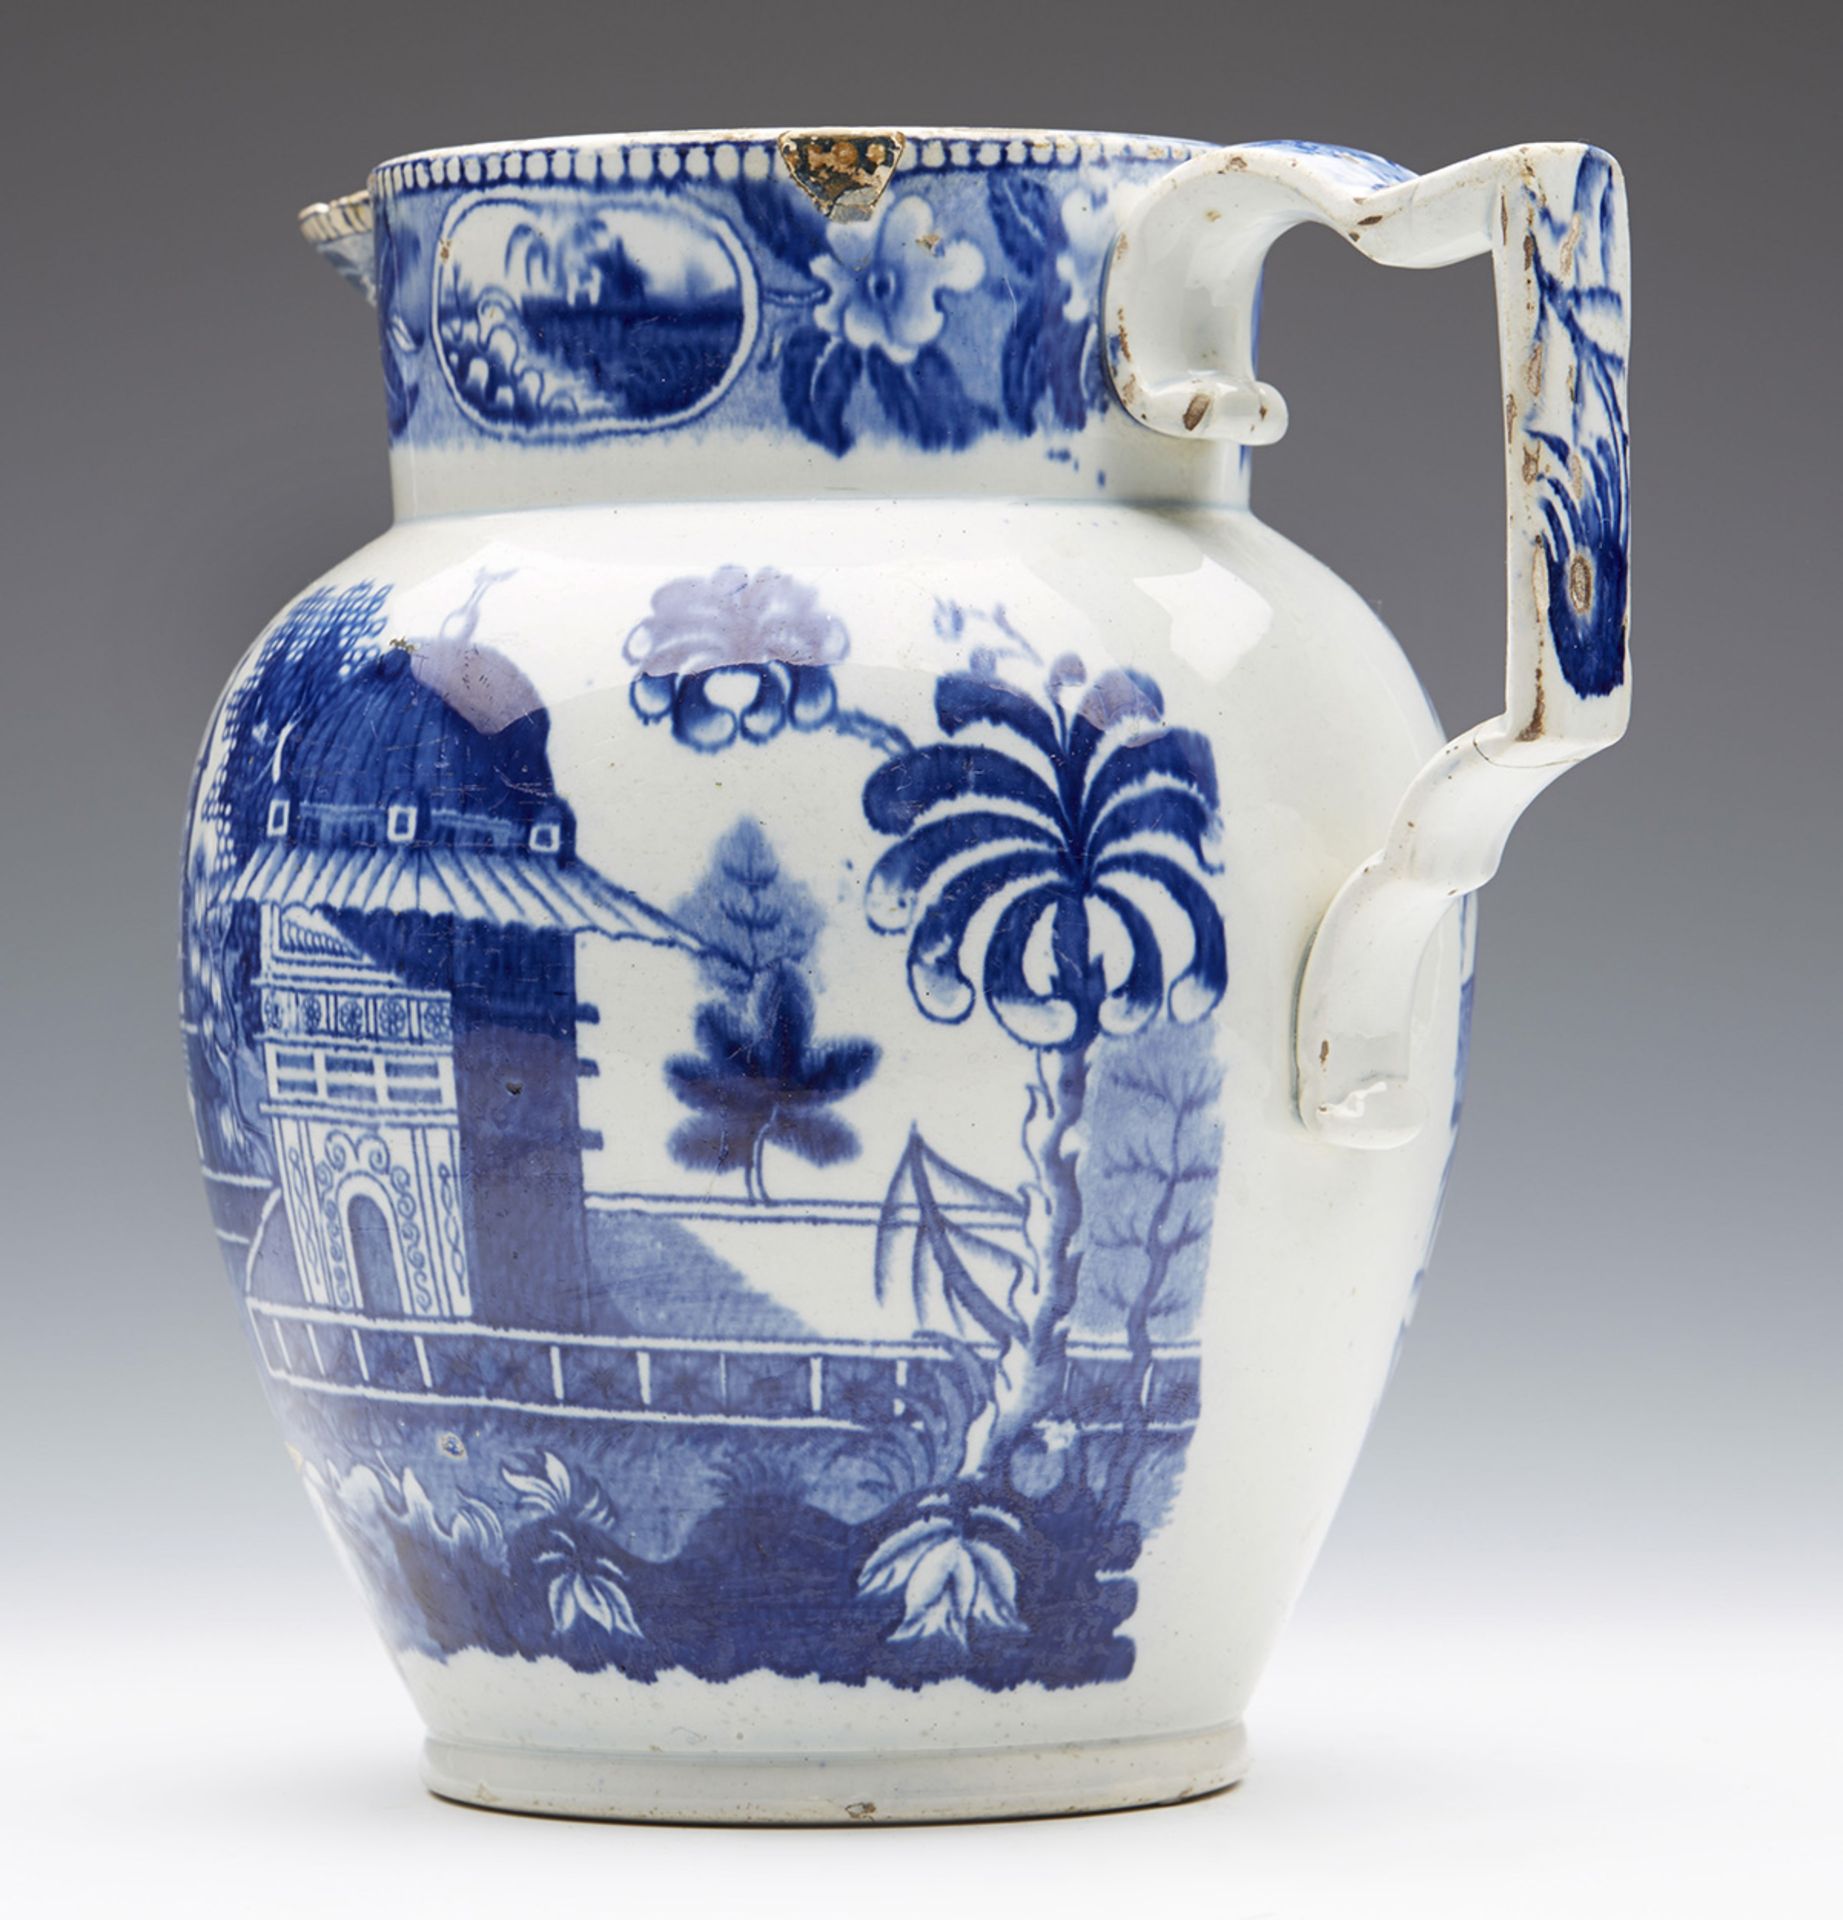 ANTIQUE ENGLISH PEARLWARE BLUE & WHITE CHINOISERIE HANDLED JUG LATE 18TH C. - Image 5 of 8